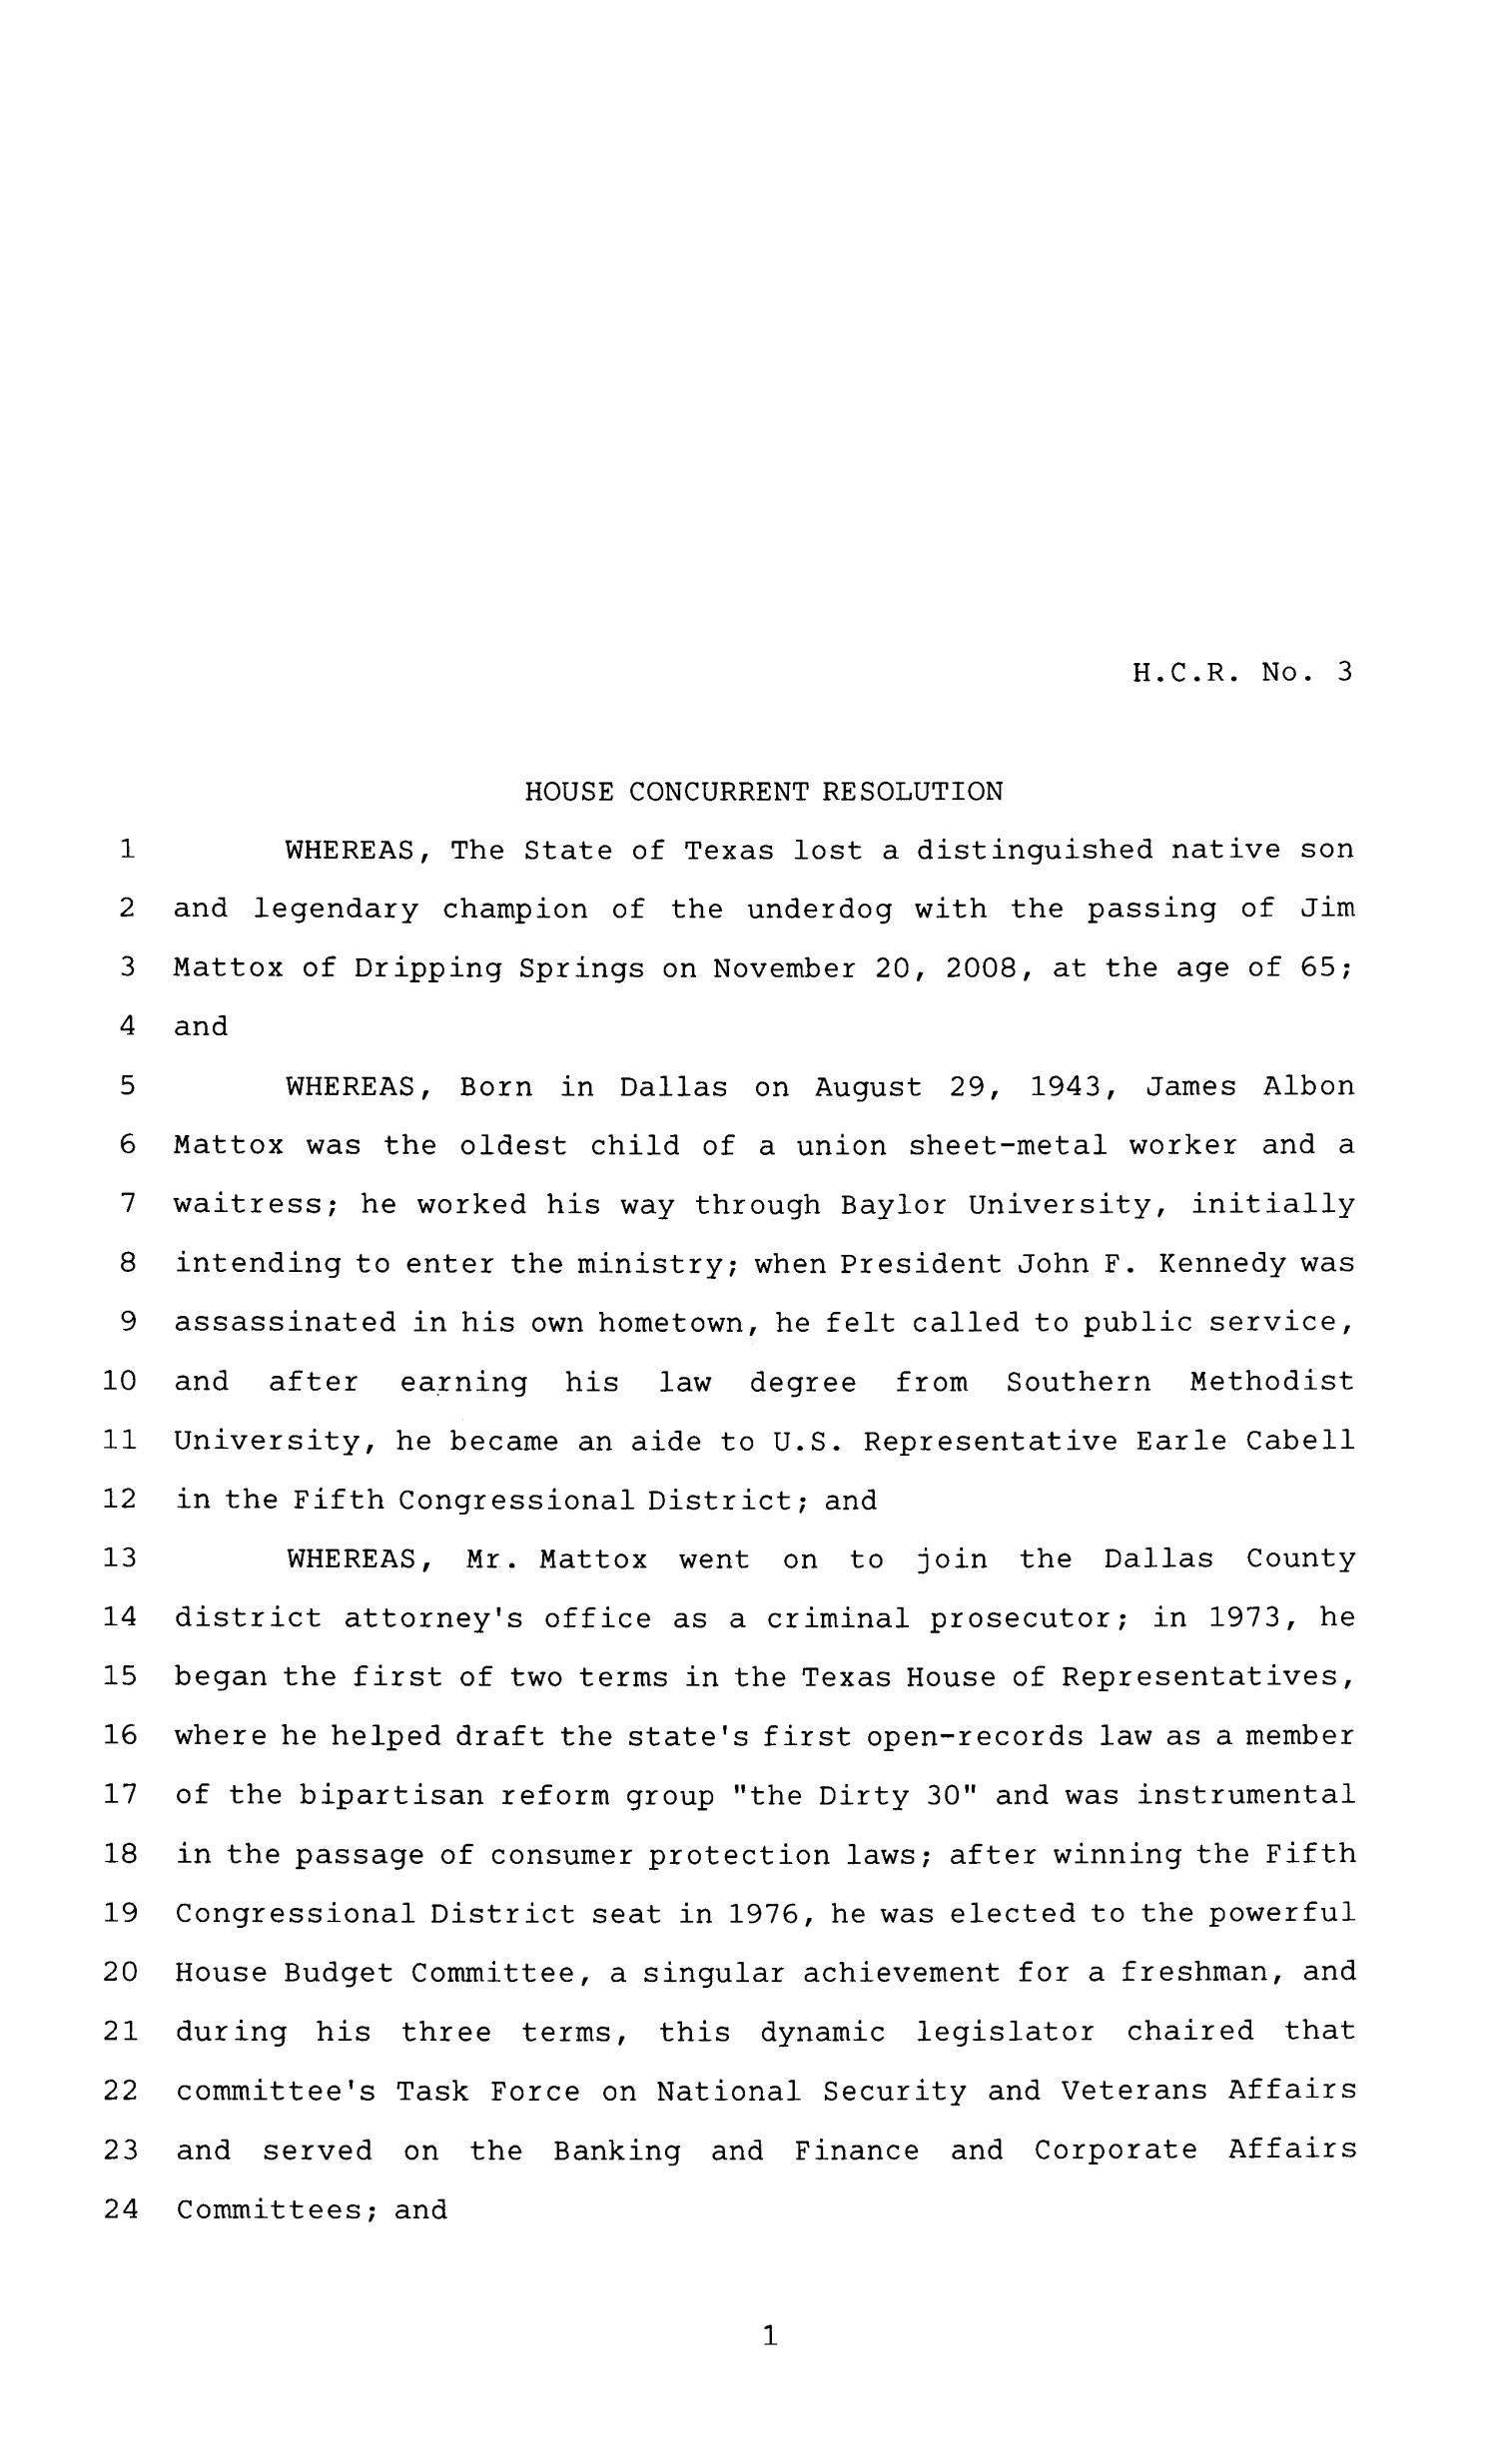 81st Texas Legislature, First Called Session, House Concurrent Resolution 3
                                                
                                                    [Sequence #]: 1 of 5
                                                